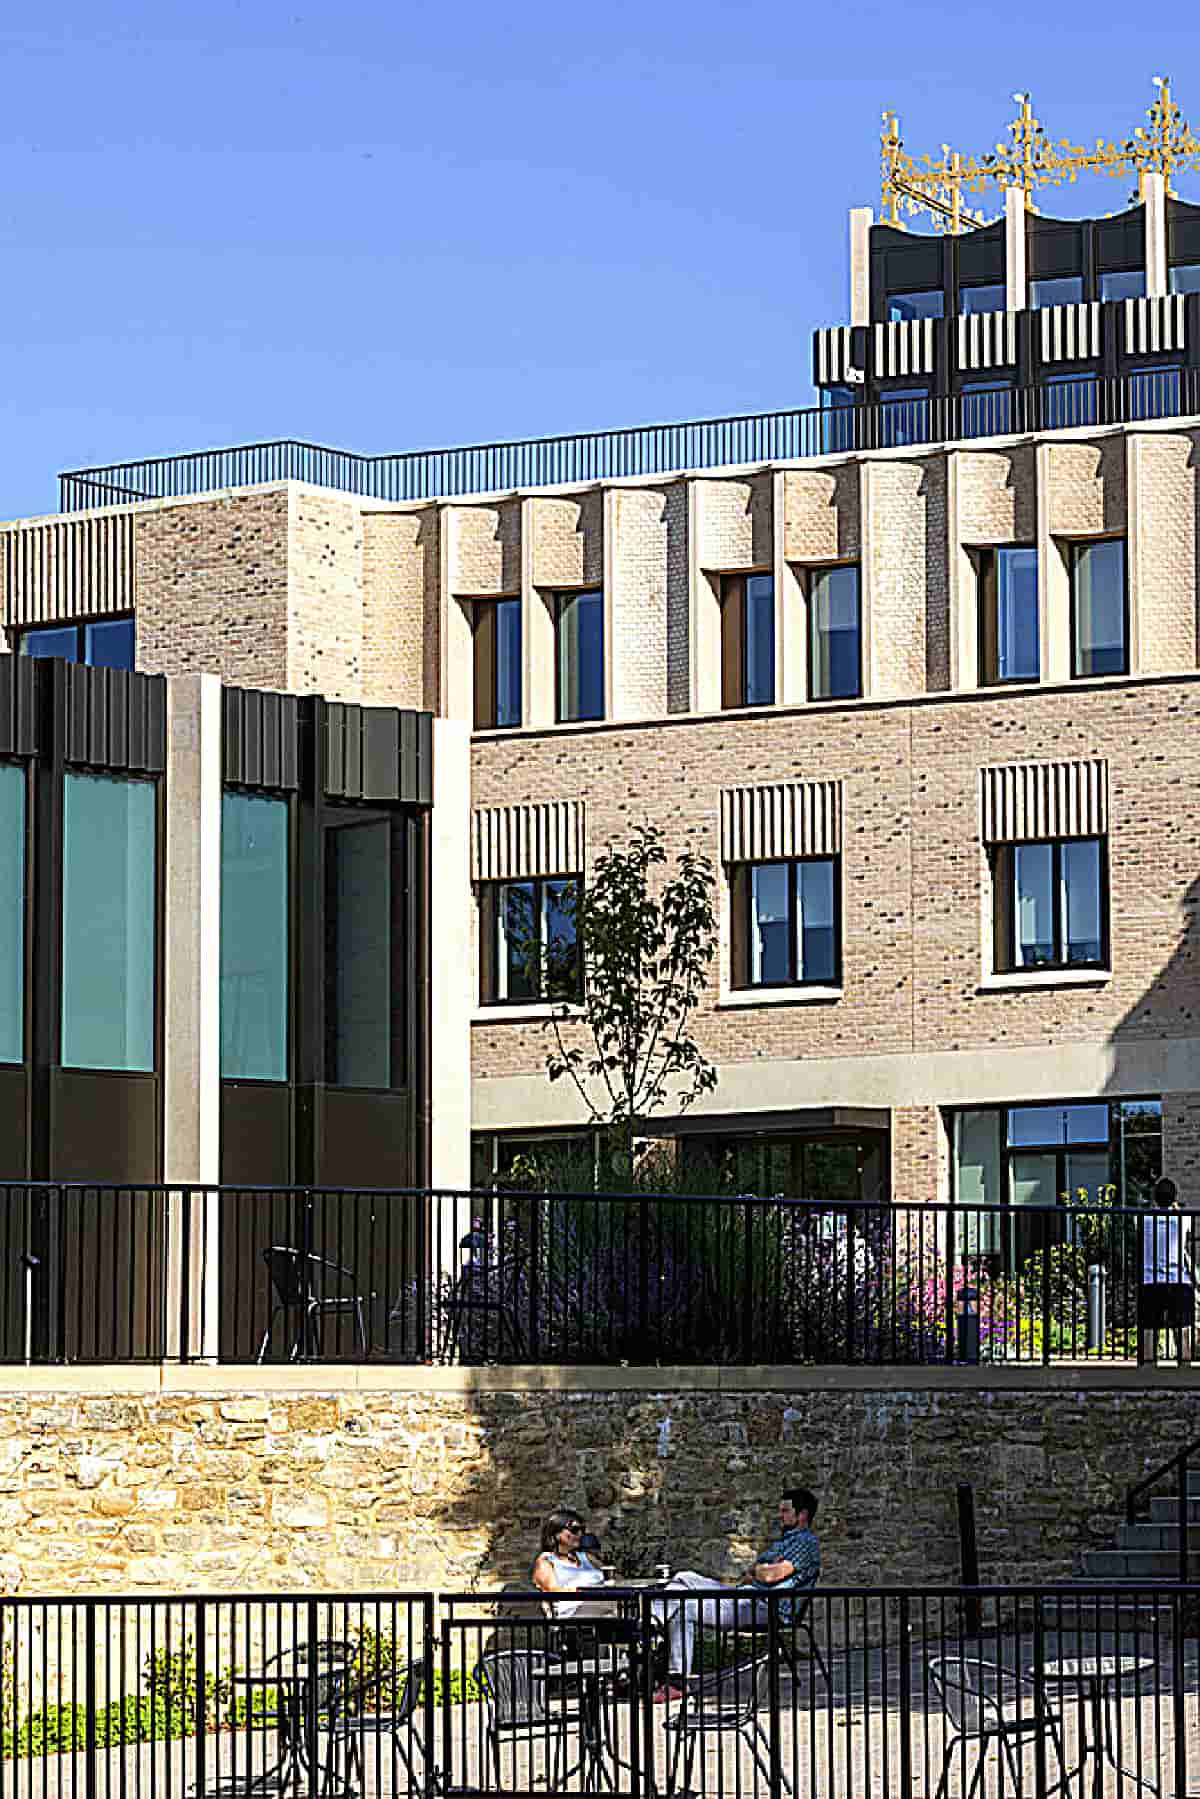 The campus of St Hilda’s College in Oxford has been the Architectural Rapper's Art of New Looking Fly